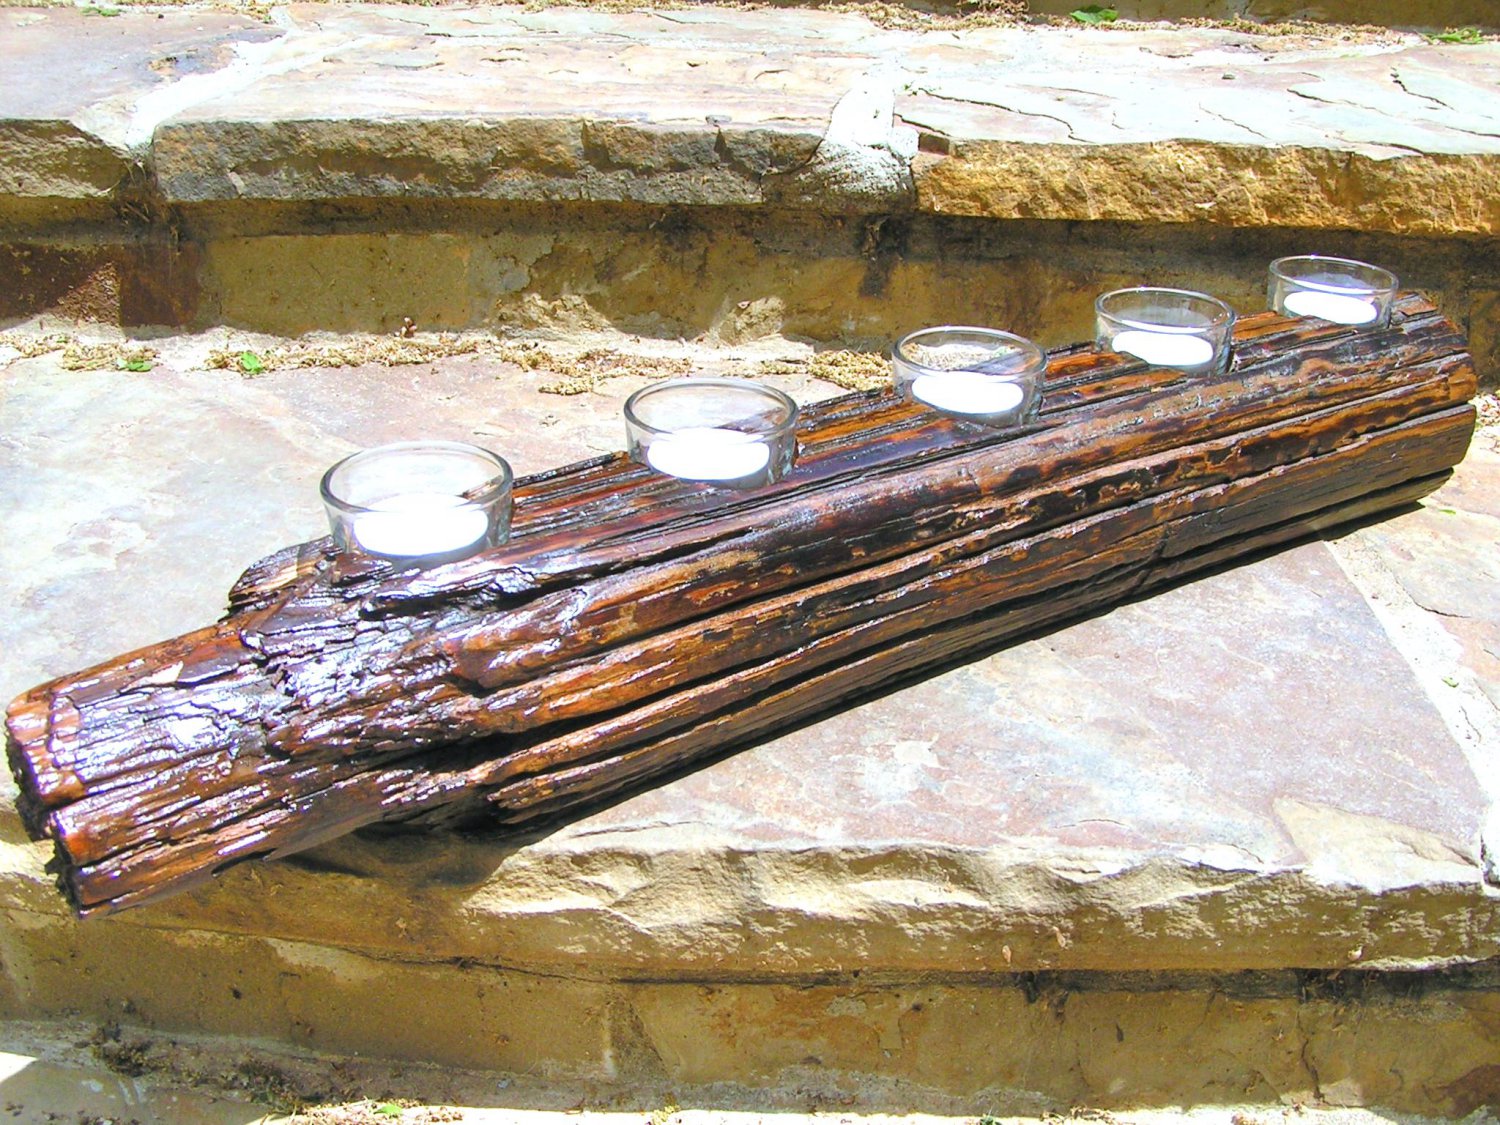 Rustic Fireplace Log candle holder set made with western barbed wire fence post 0403